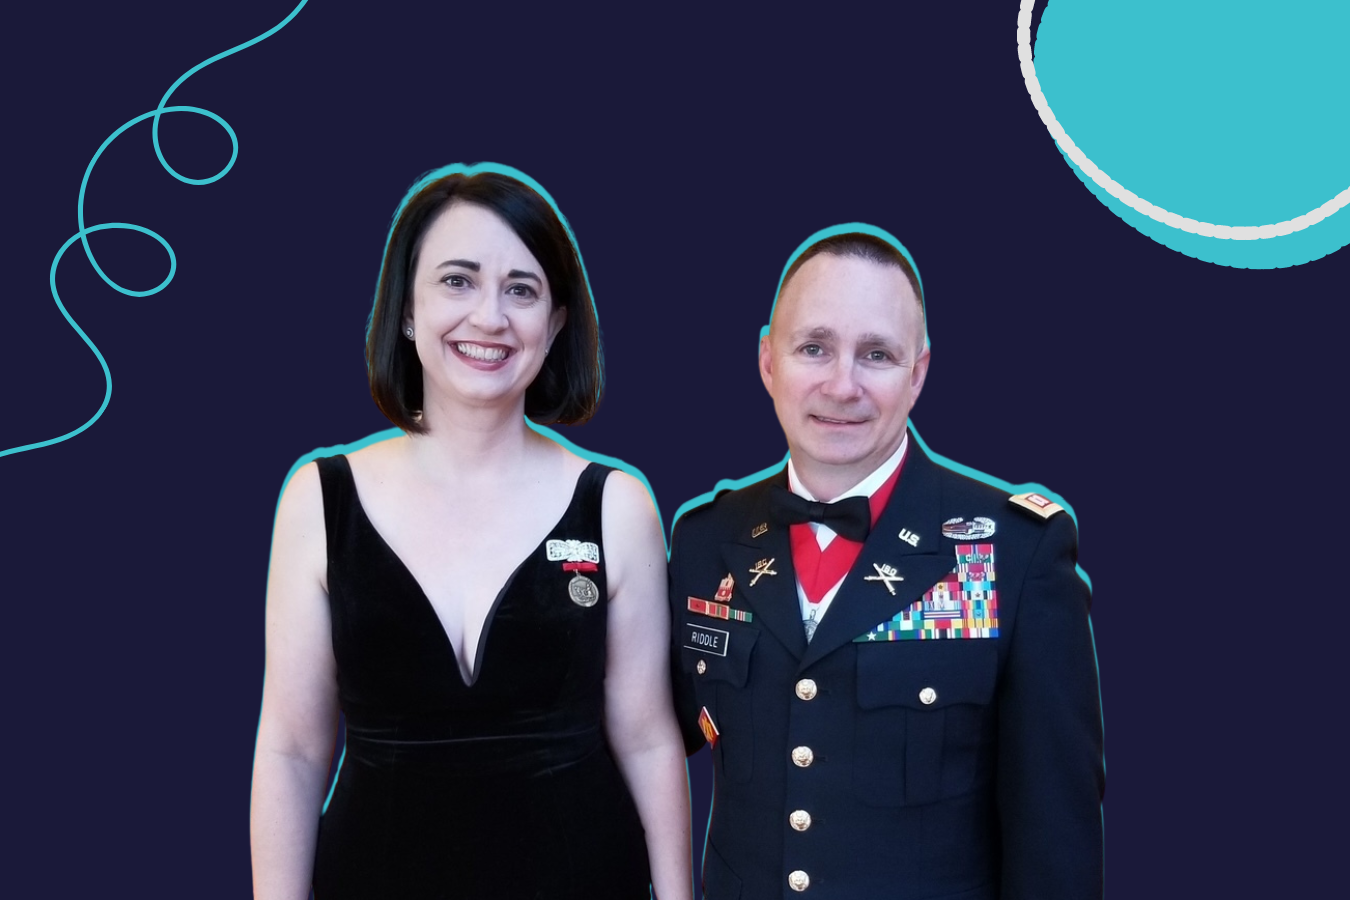 How flex work helps military spouse Jennifer Riddle balance career, family, and service.